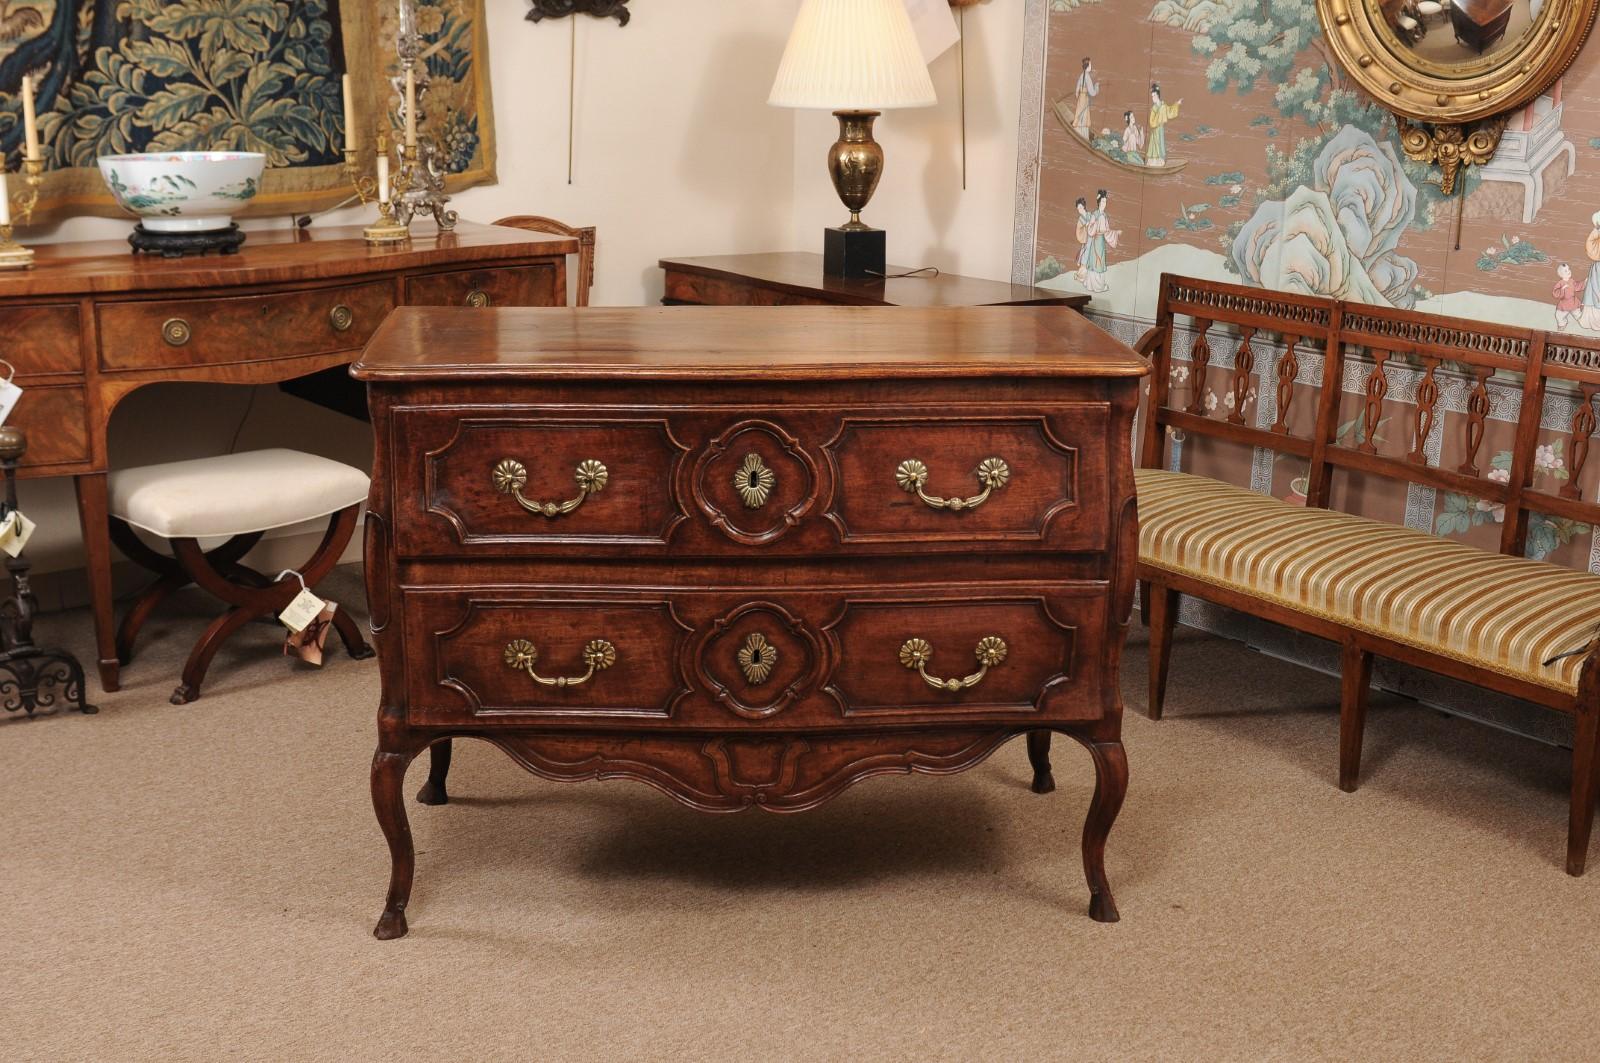 Mid-18th Century French Louis XV Walnut Commode with 2 Drawers, Cabriole Legs, & In Good Condition For Sale In Atlanta, GA